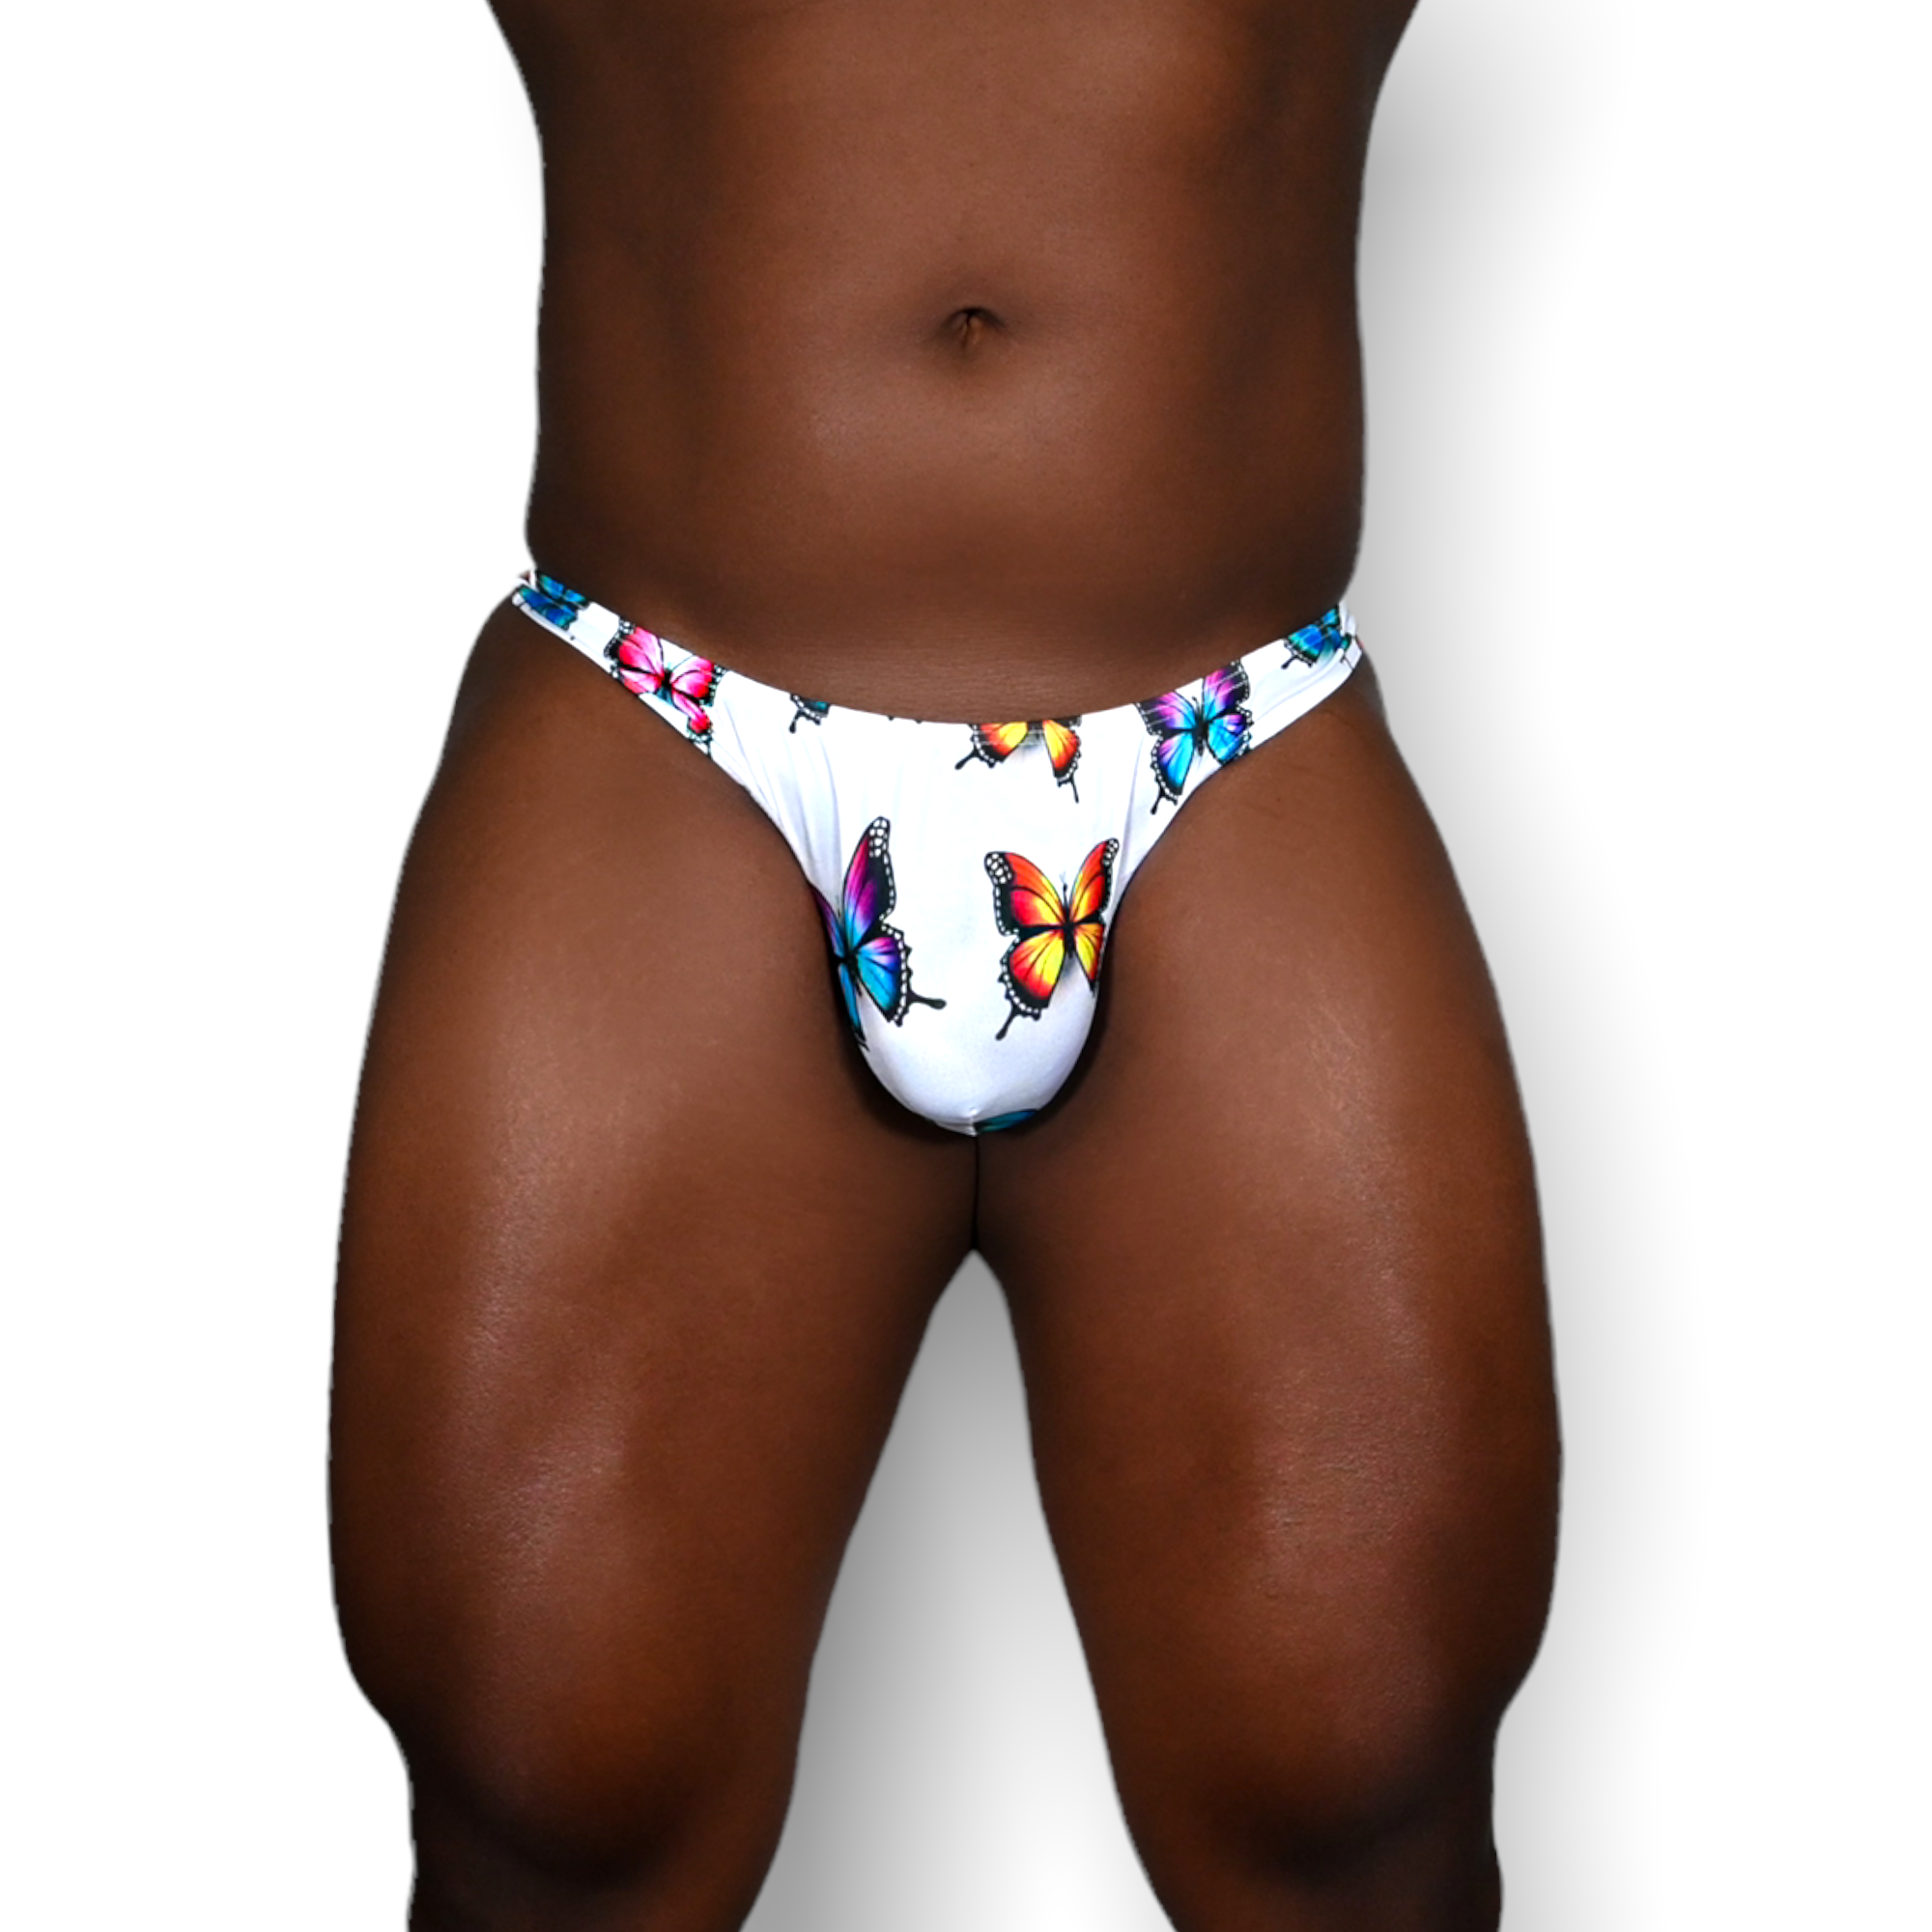 Butterfly effect MCE thong